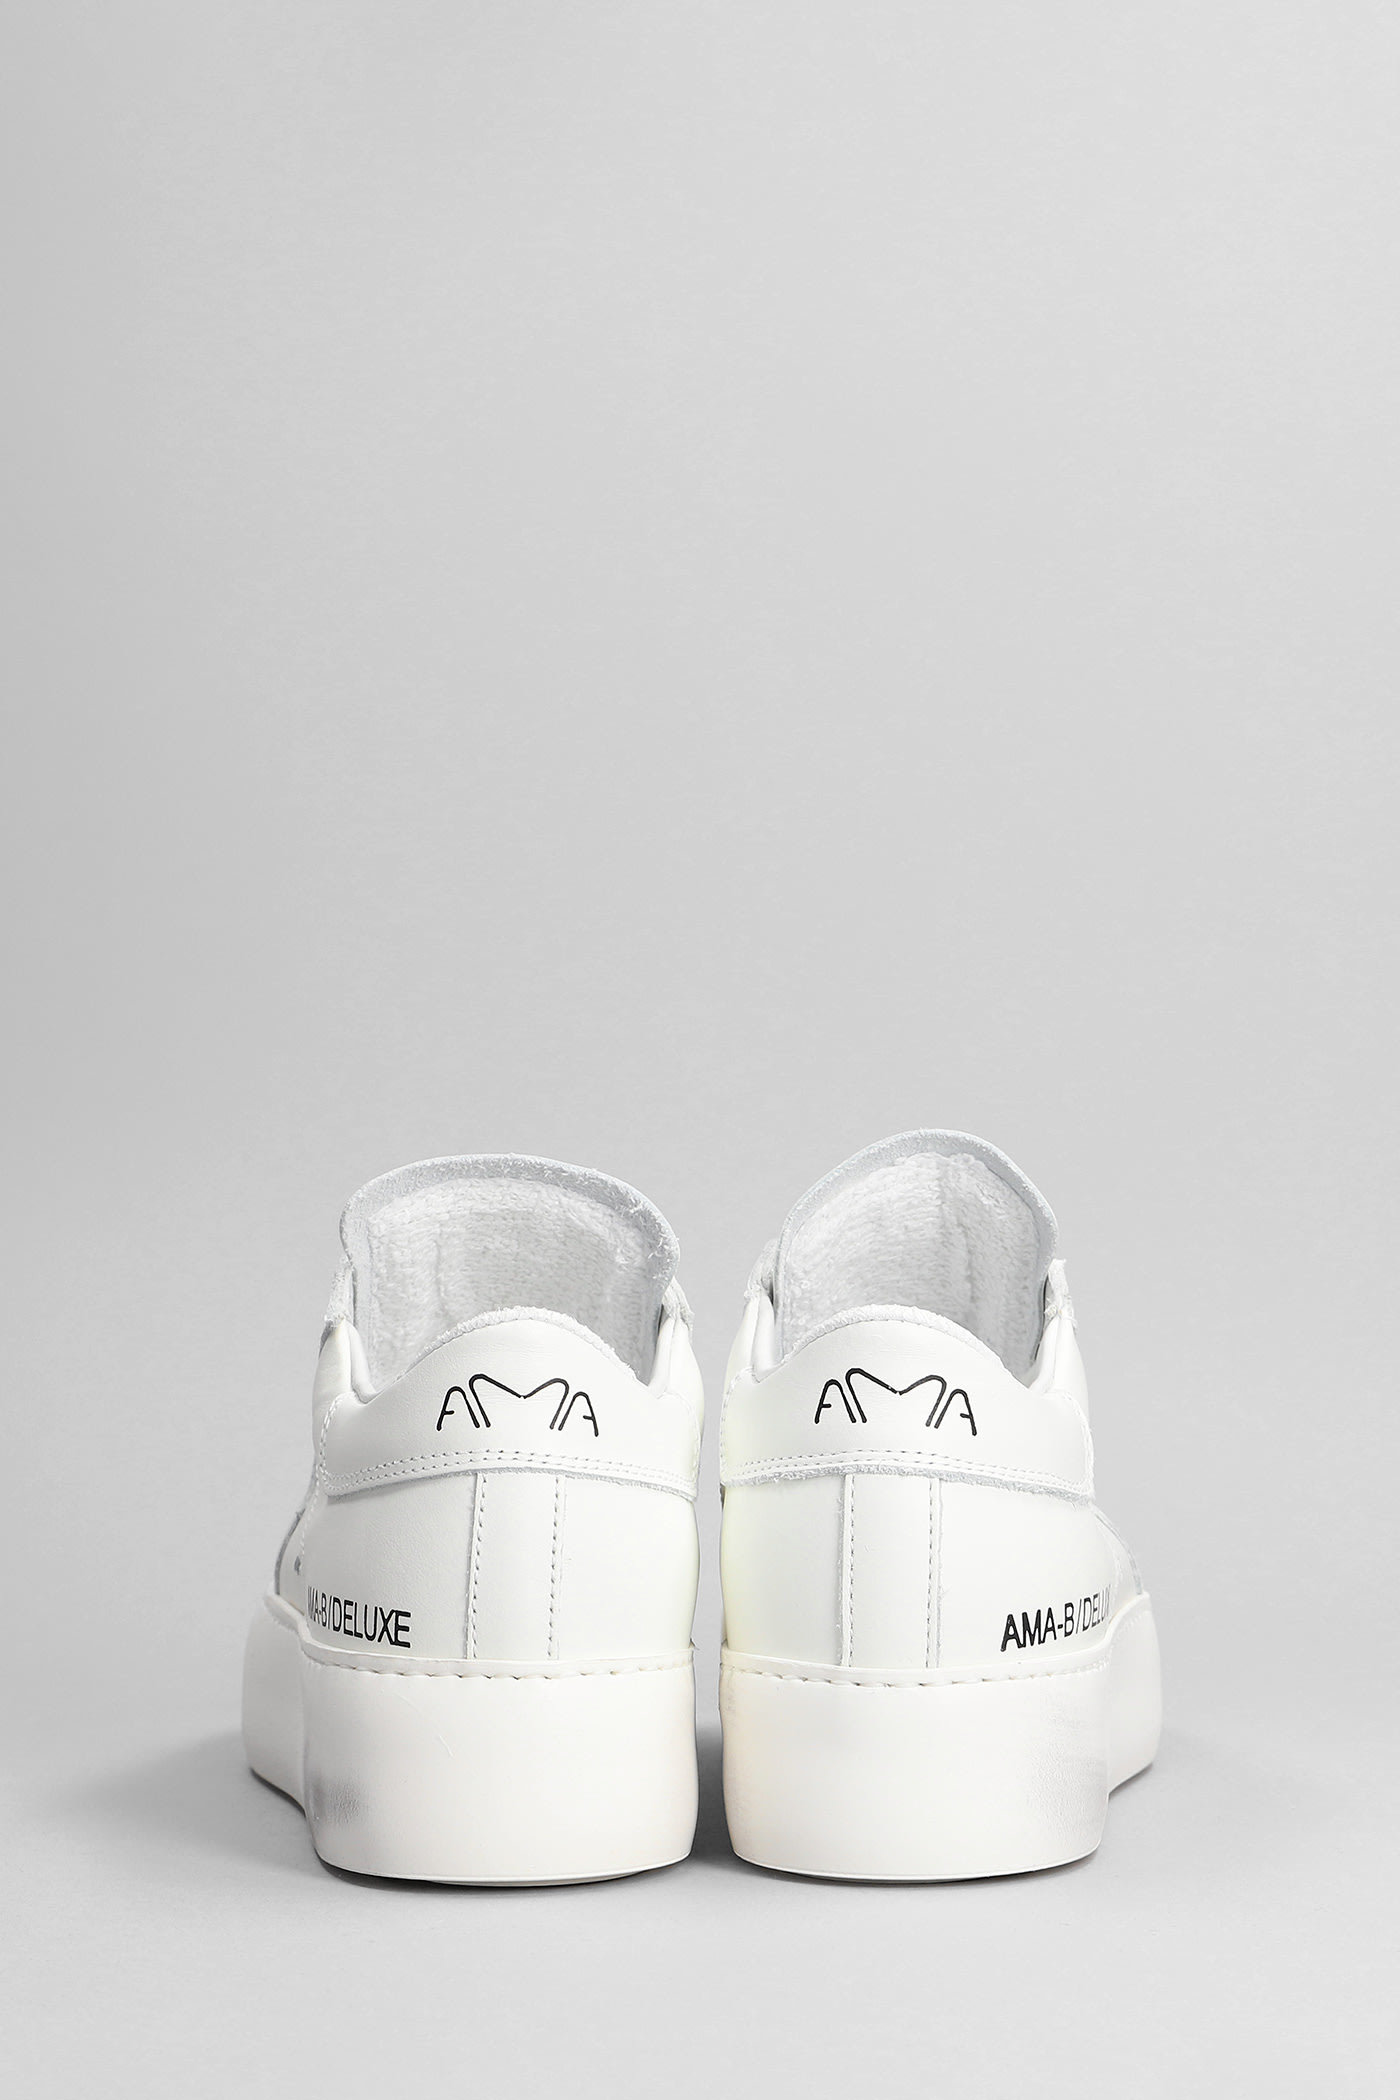 Ama Brand Sneakers In White Leather | ModeSens